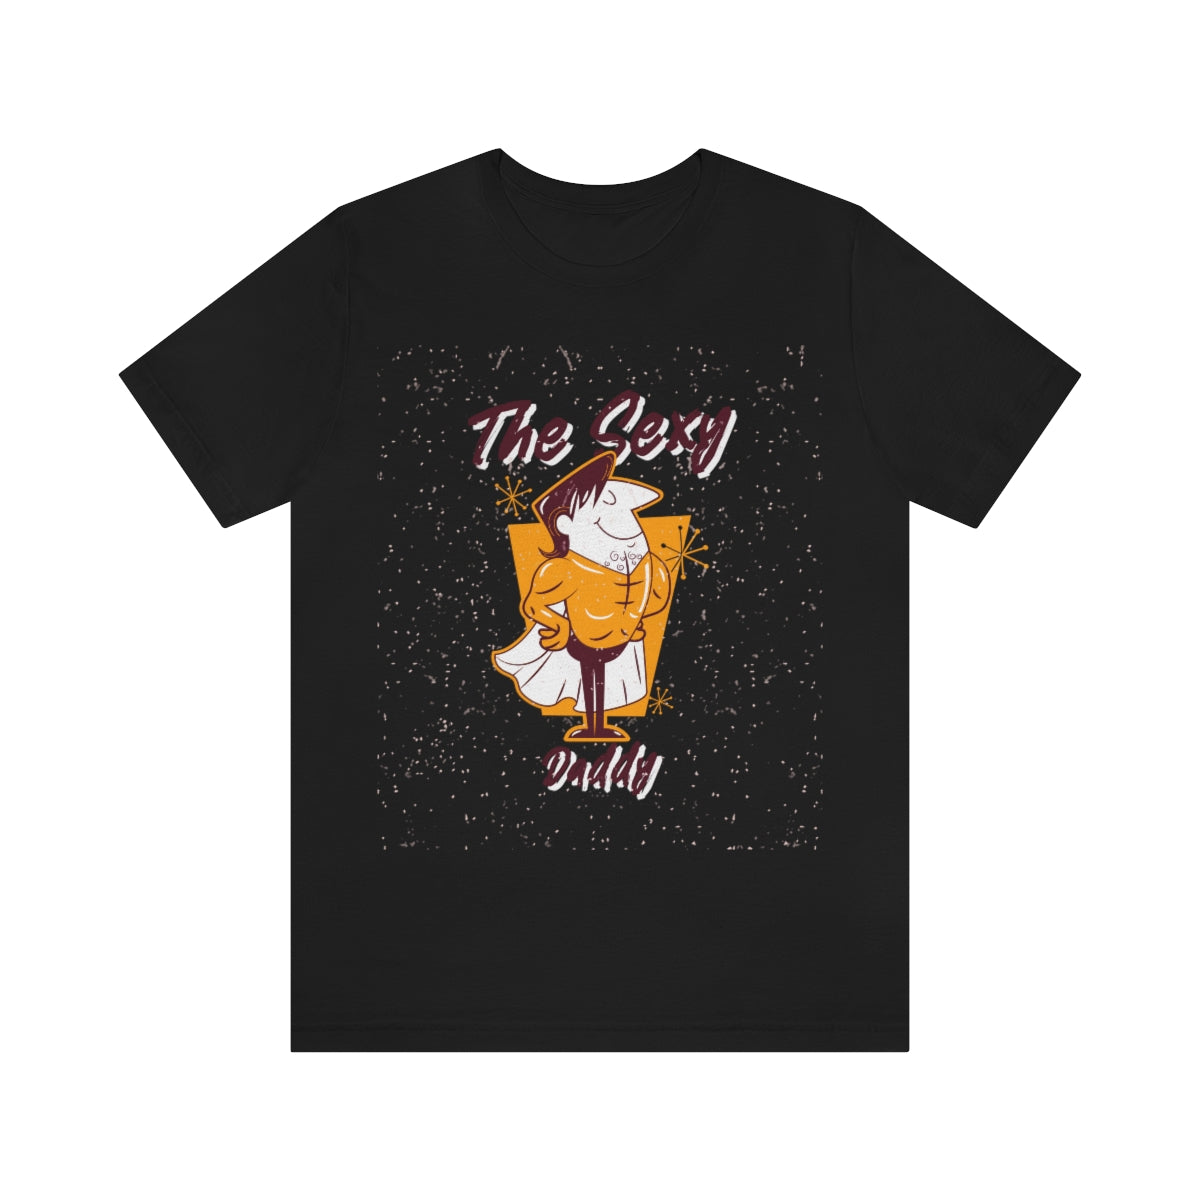 The Sexy Daddy - Unisex T-Shirt